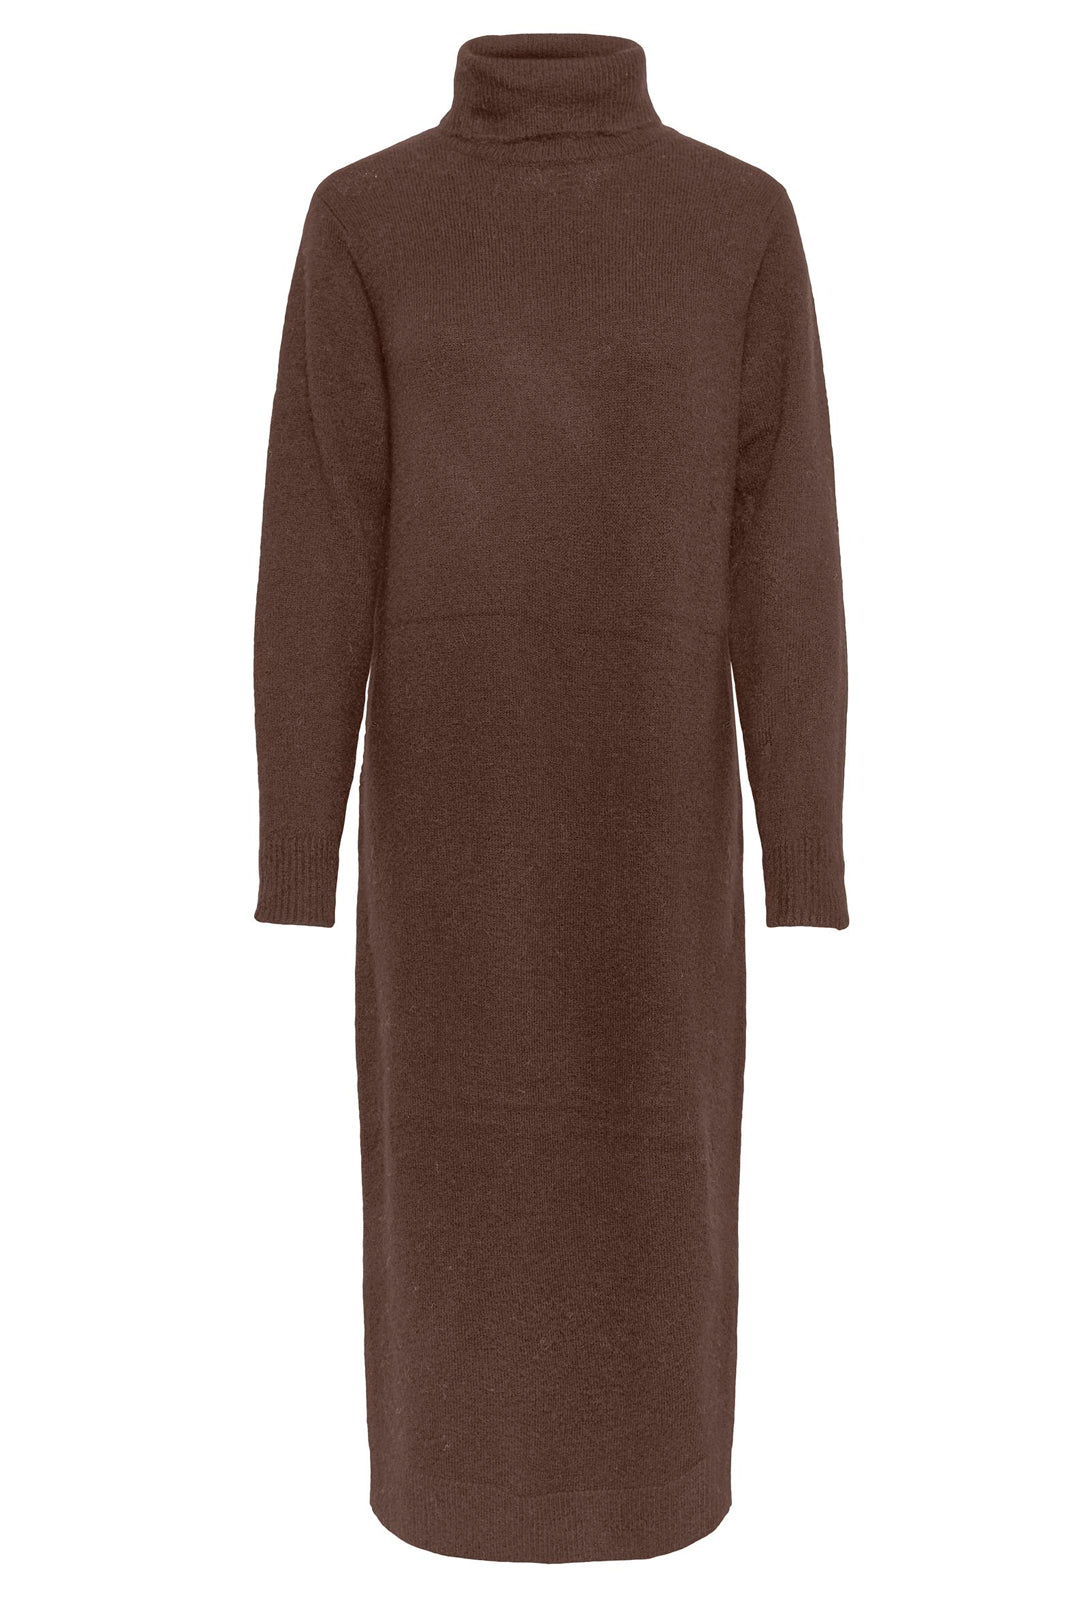 Pieces - PcJuliana Ls Rollneck Knit Dress Noos Bc - Chicory Coffee Kjoler 